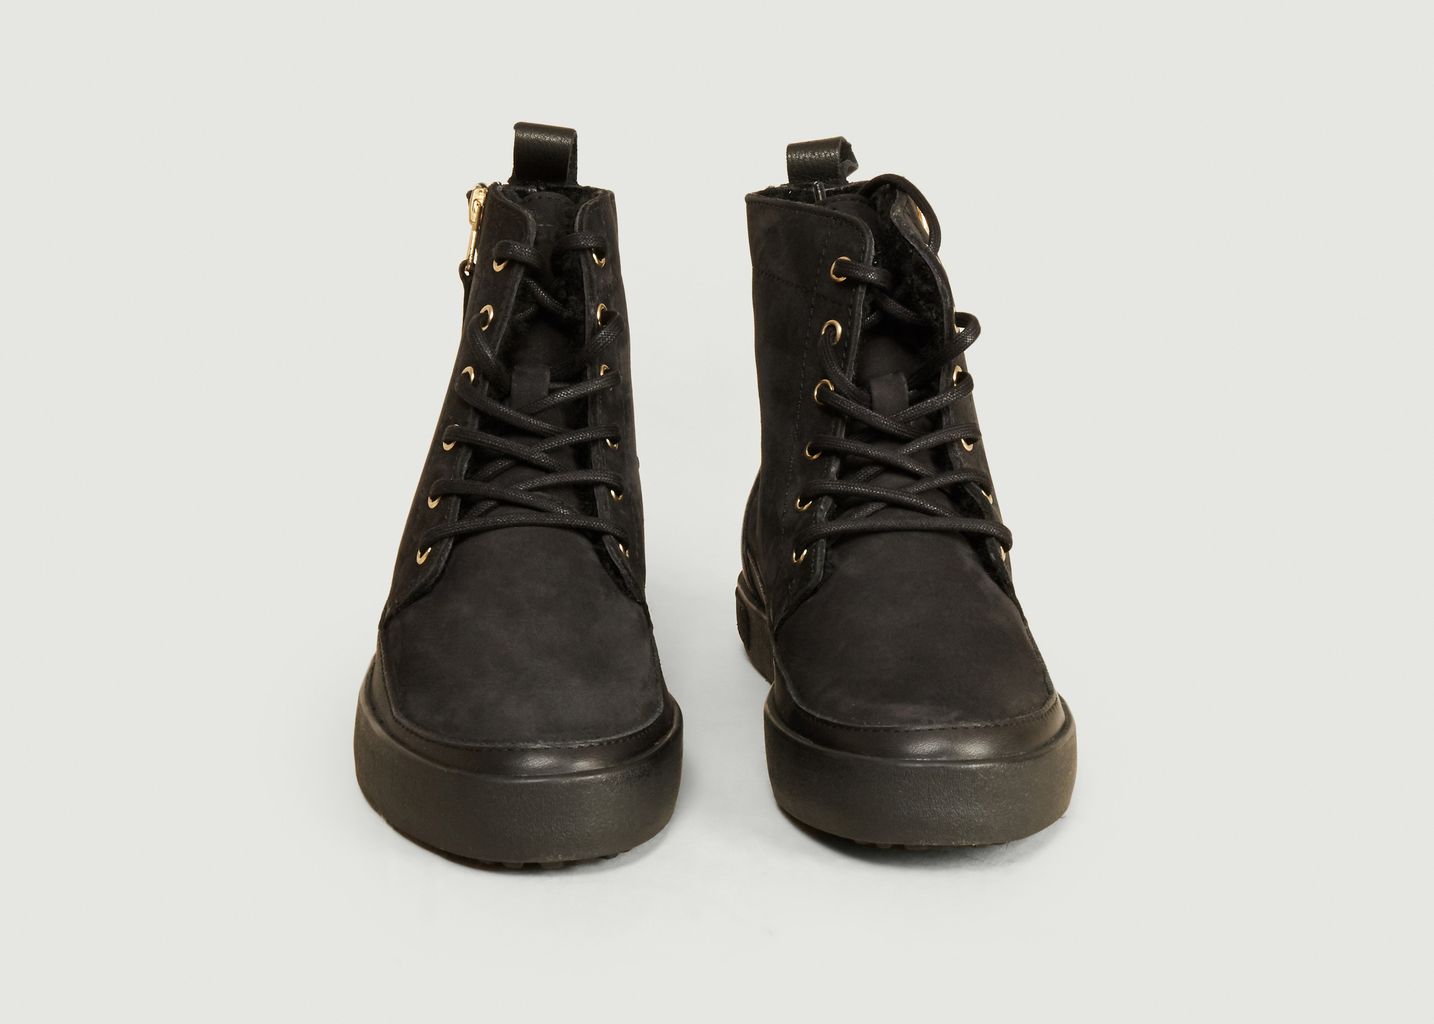 CW96 zipped and lace-up leather boots - Blackstone